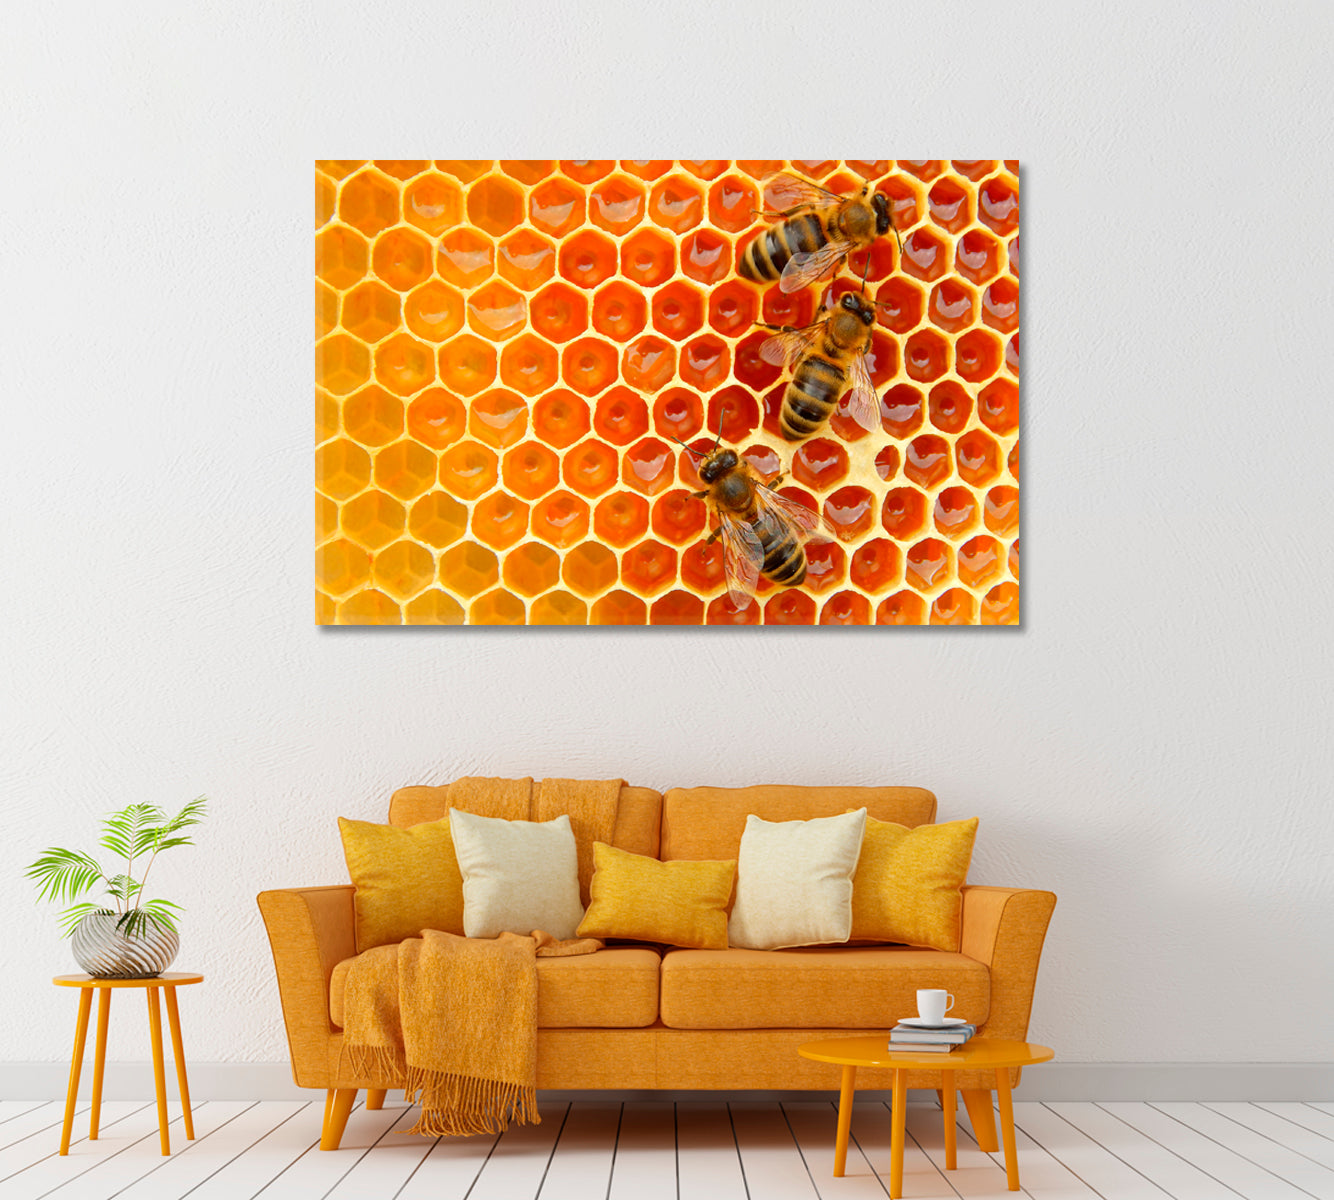 Bees on Honeycombs Canvas Print ArtLexy 1 Panel 24"x16" inches 